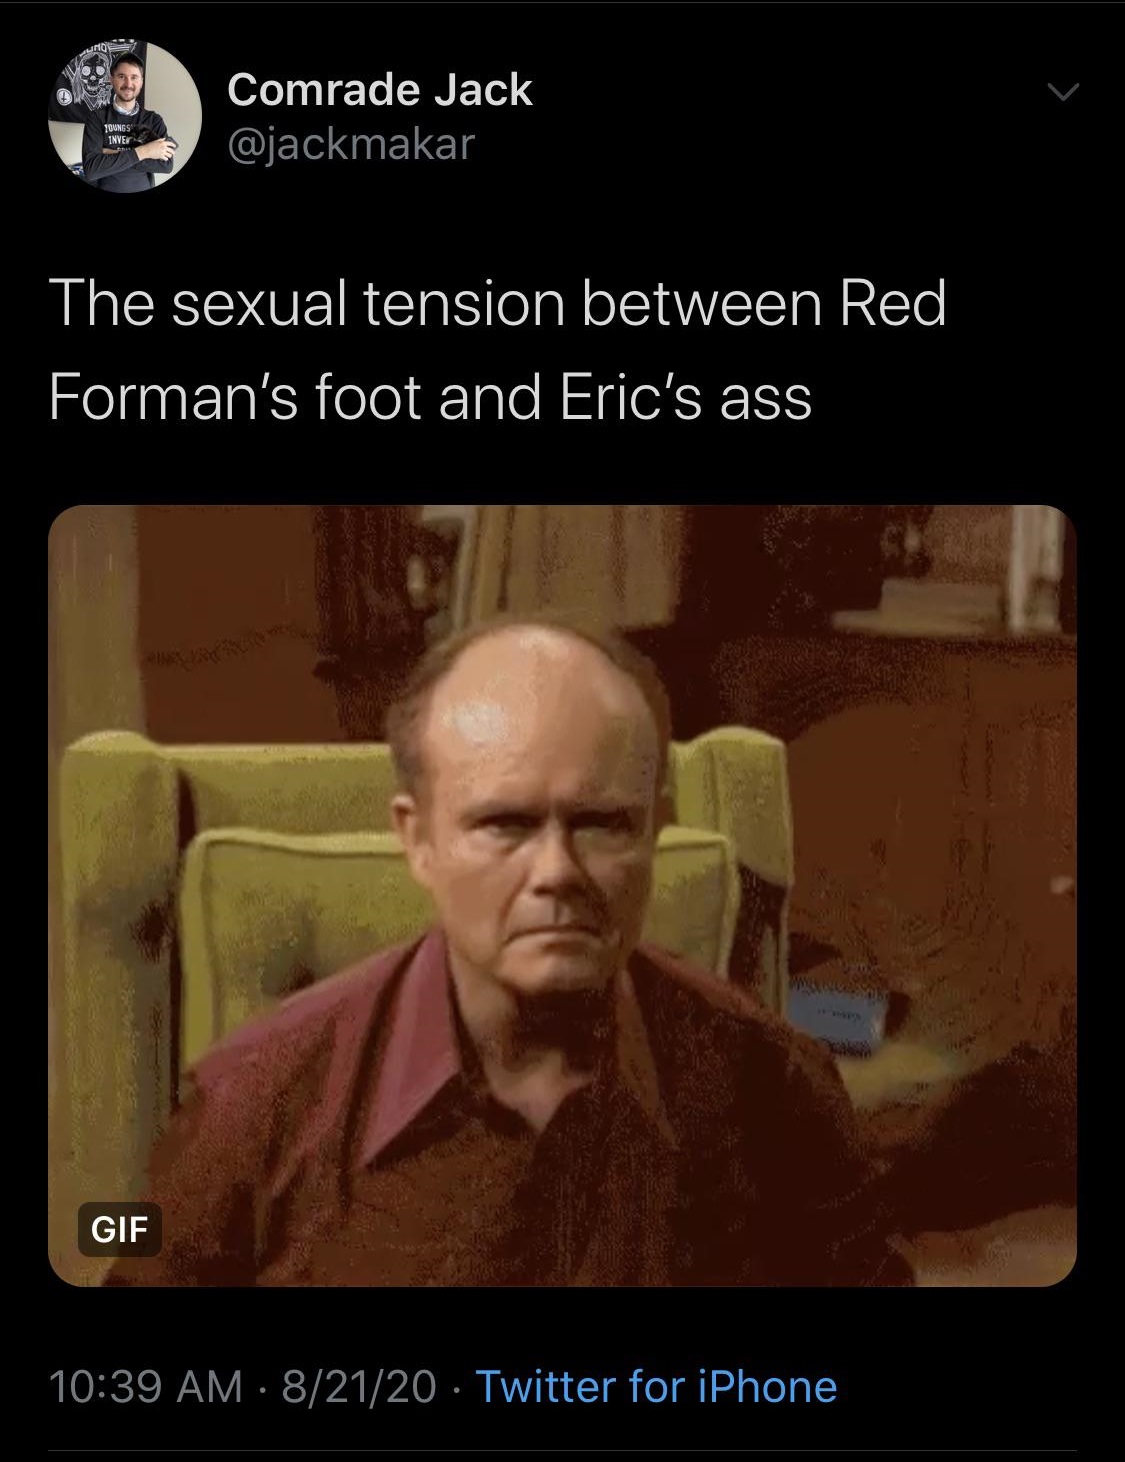 photo caption - Comrade Jack Toongs Invey The sexual tension between Red Forman's foot and Eric's ass Gif 82120 Twitter for iPhone